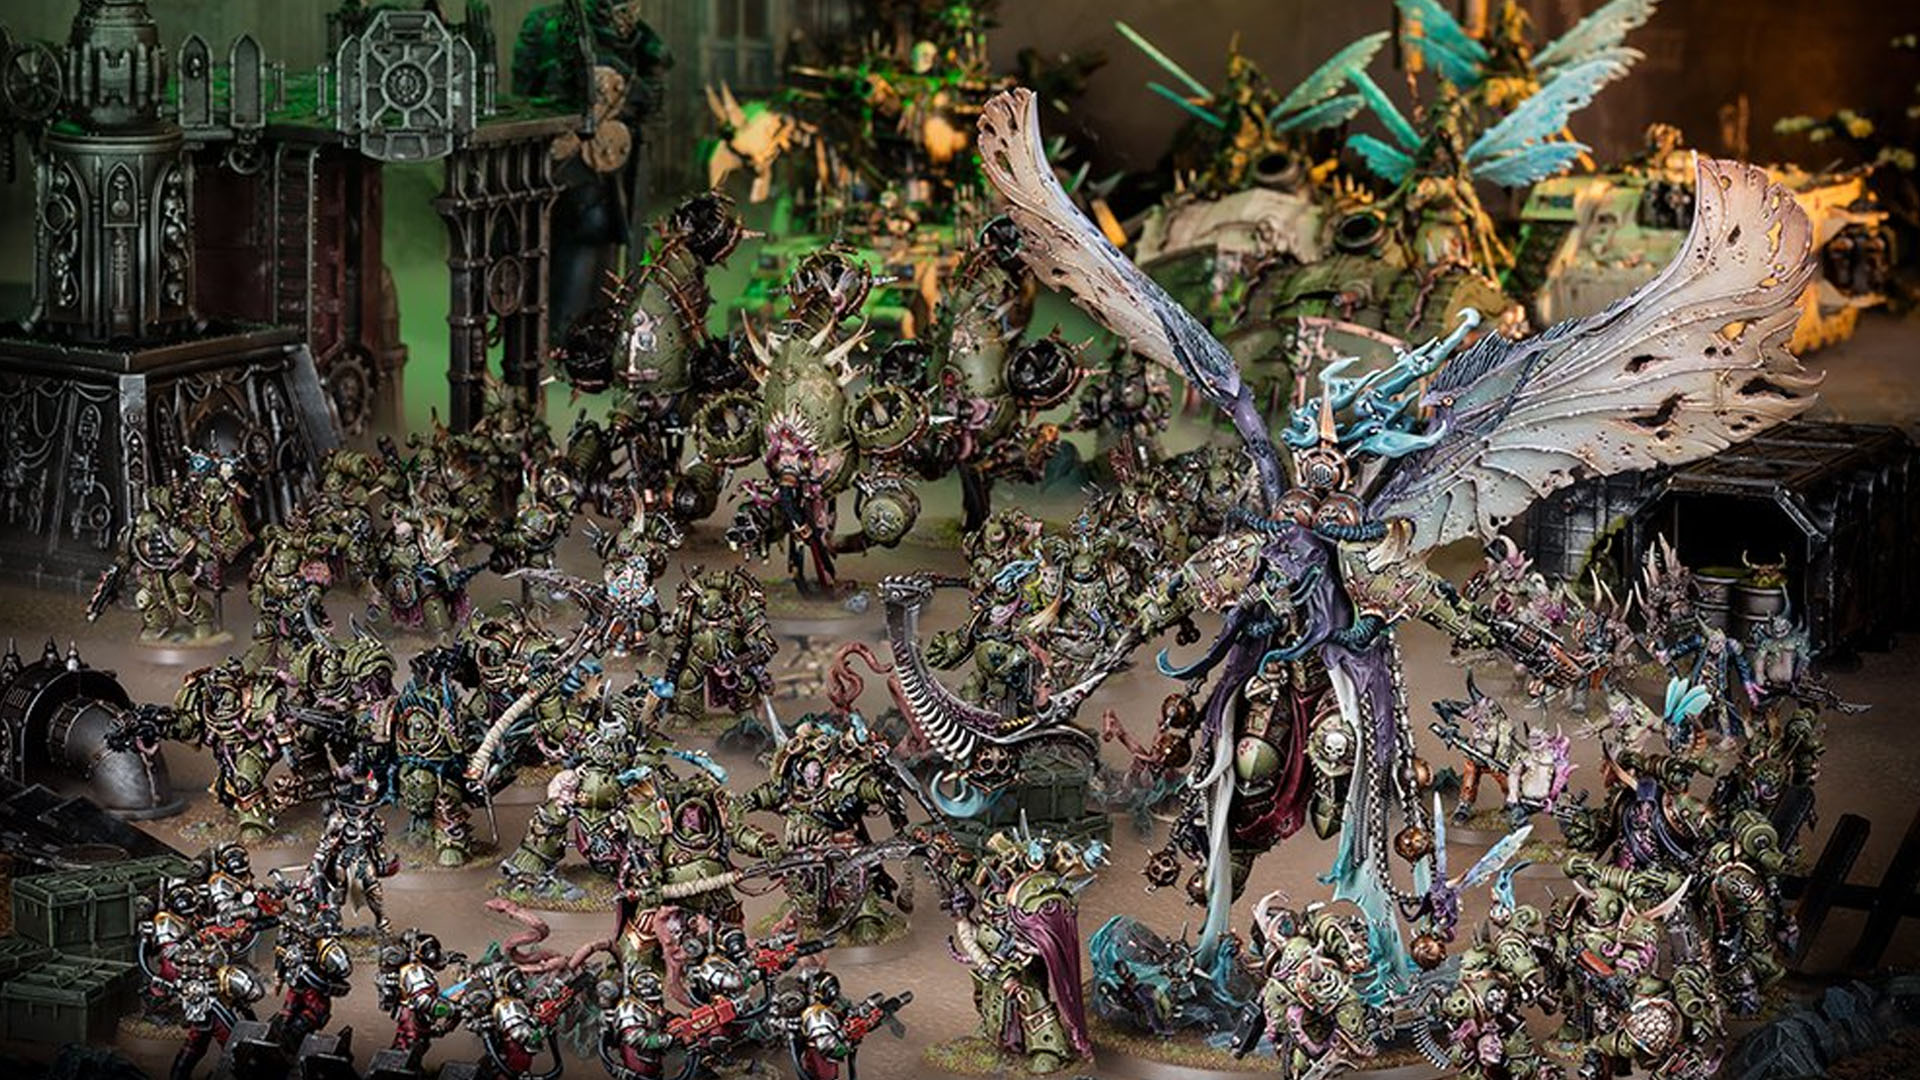 Warhammer 40k Mortarion Primarch guide - Games Workshop photo showing the new mortarion model at the head of a Death Guard army